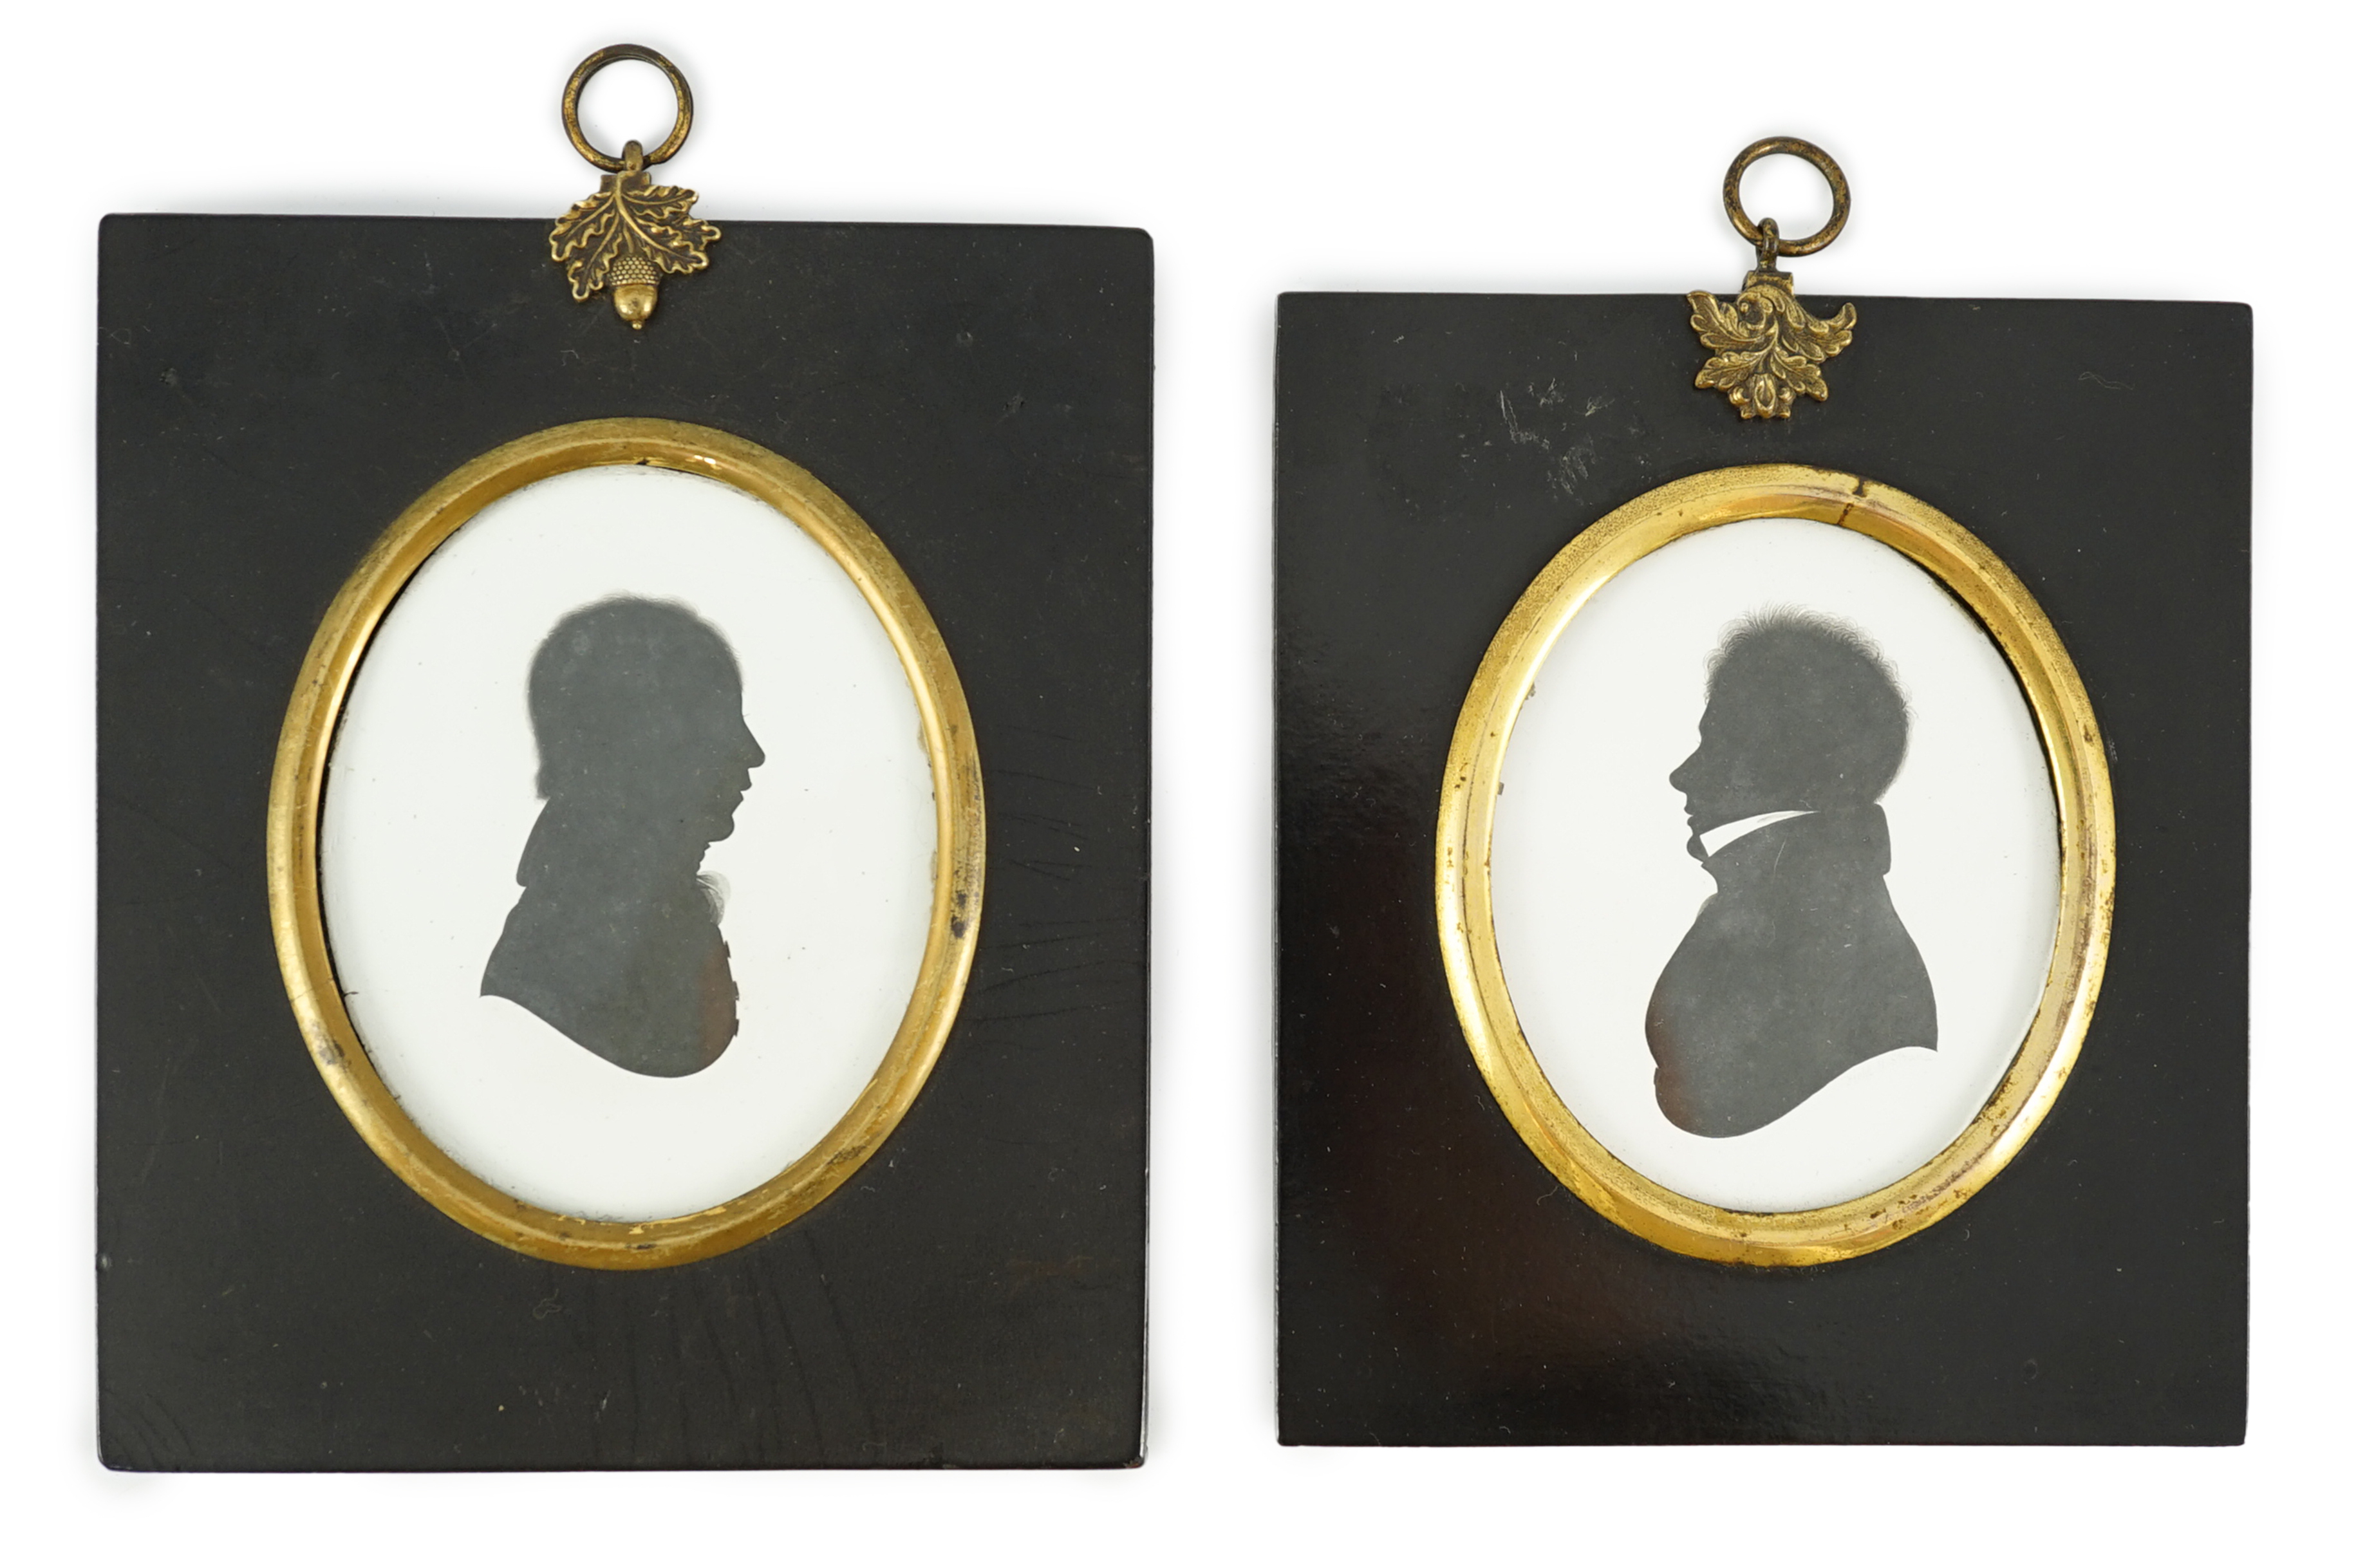 John Miers (1756-1821) and John Field (1772-1848), Silhouettes of a gentlemen, painted plaster (2), 8.5 x 7cm. & 7.8 x 6.5cm.